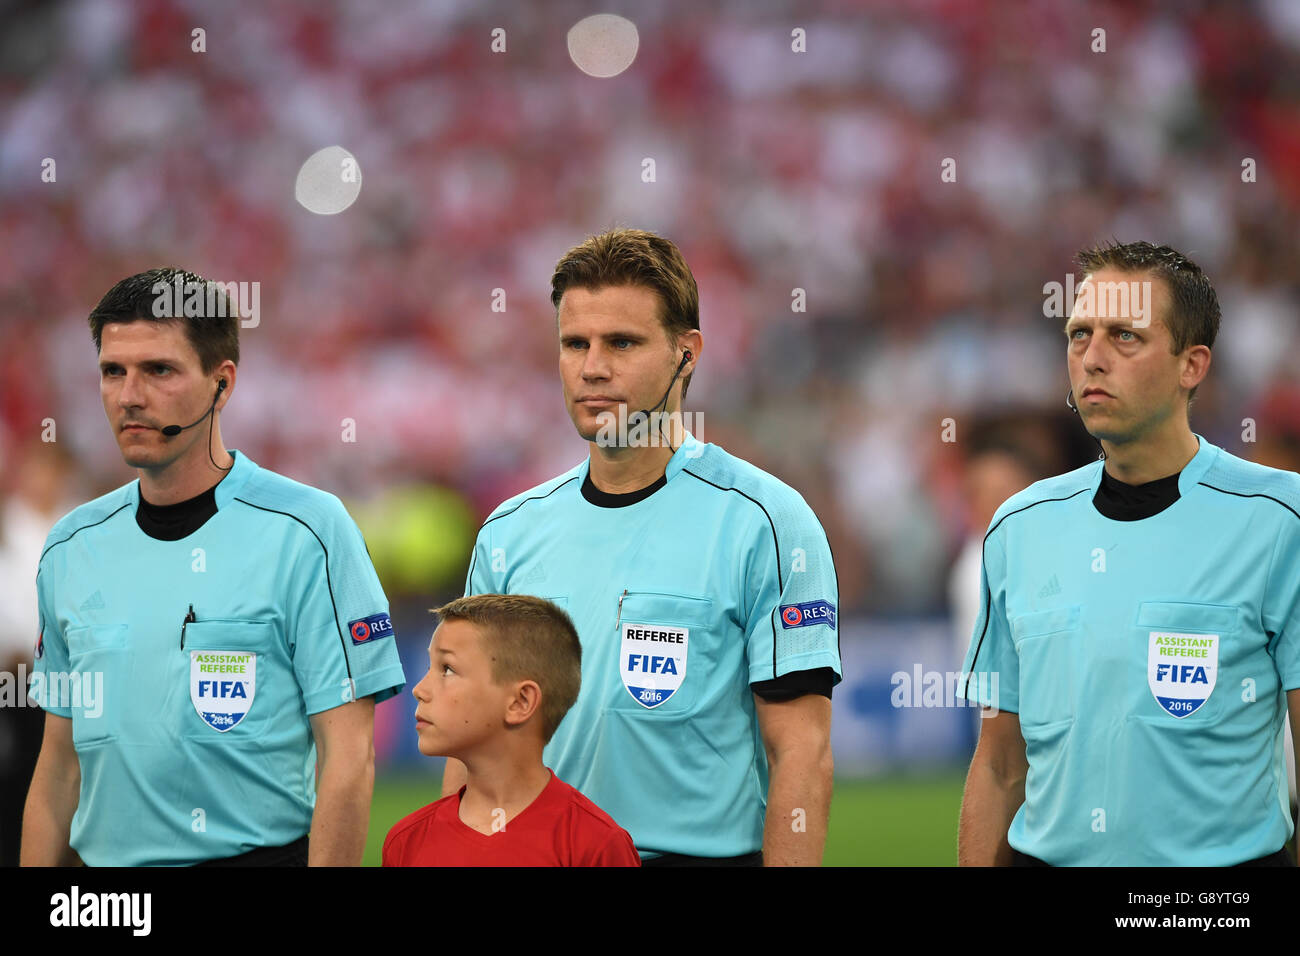 Marseille, France. 30th June, 2016. Referee Felix Brych of Germany (C) and his team, assistant referee Stefan Lupp (L) of Germany, assistant referee Mark Borsch (R) of Germany before the UEFA EURO 2016 quarter final soccer match between Poland and Portugal at the Stade Velodrome in Marseille, France, 30 June 2016. Photo: Federico Gambarini/dpa/Alamy Live News Stock Photo